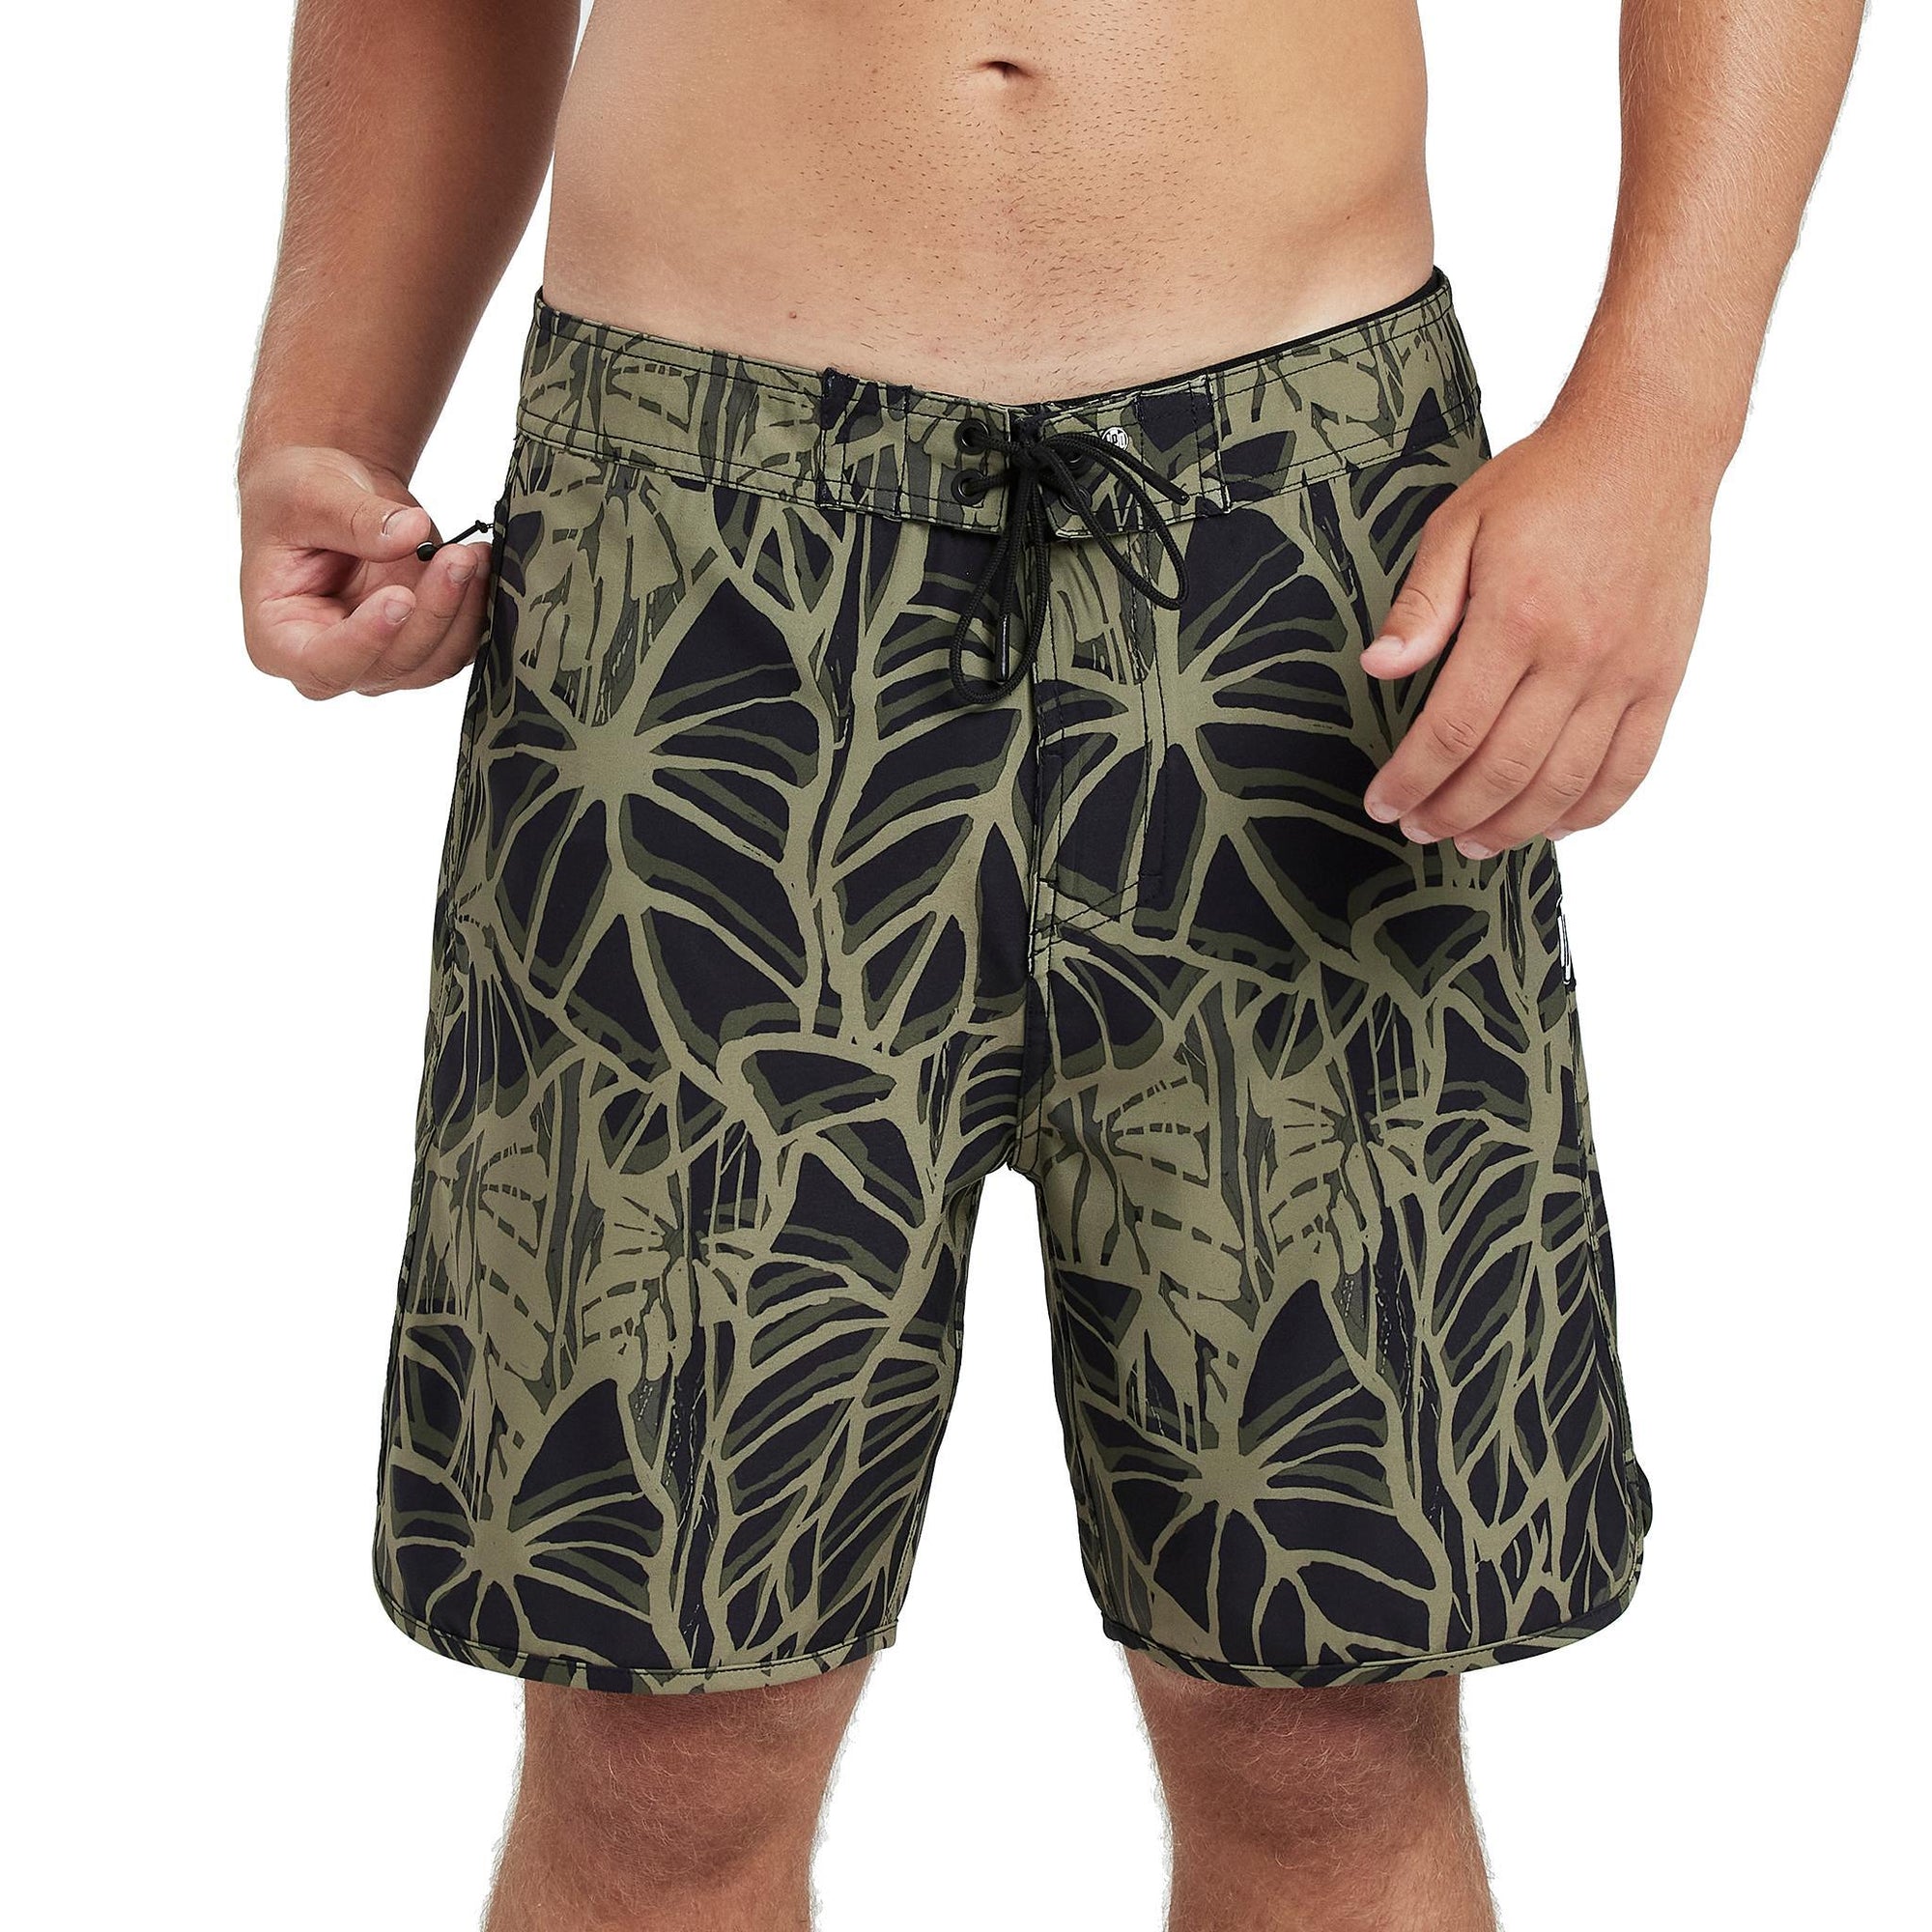 Banjo blue boardshorts with a large abstract beige offset floral print front view. 